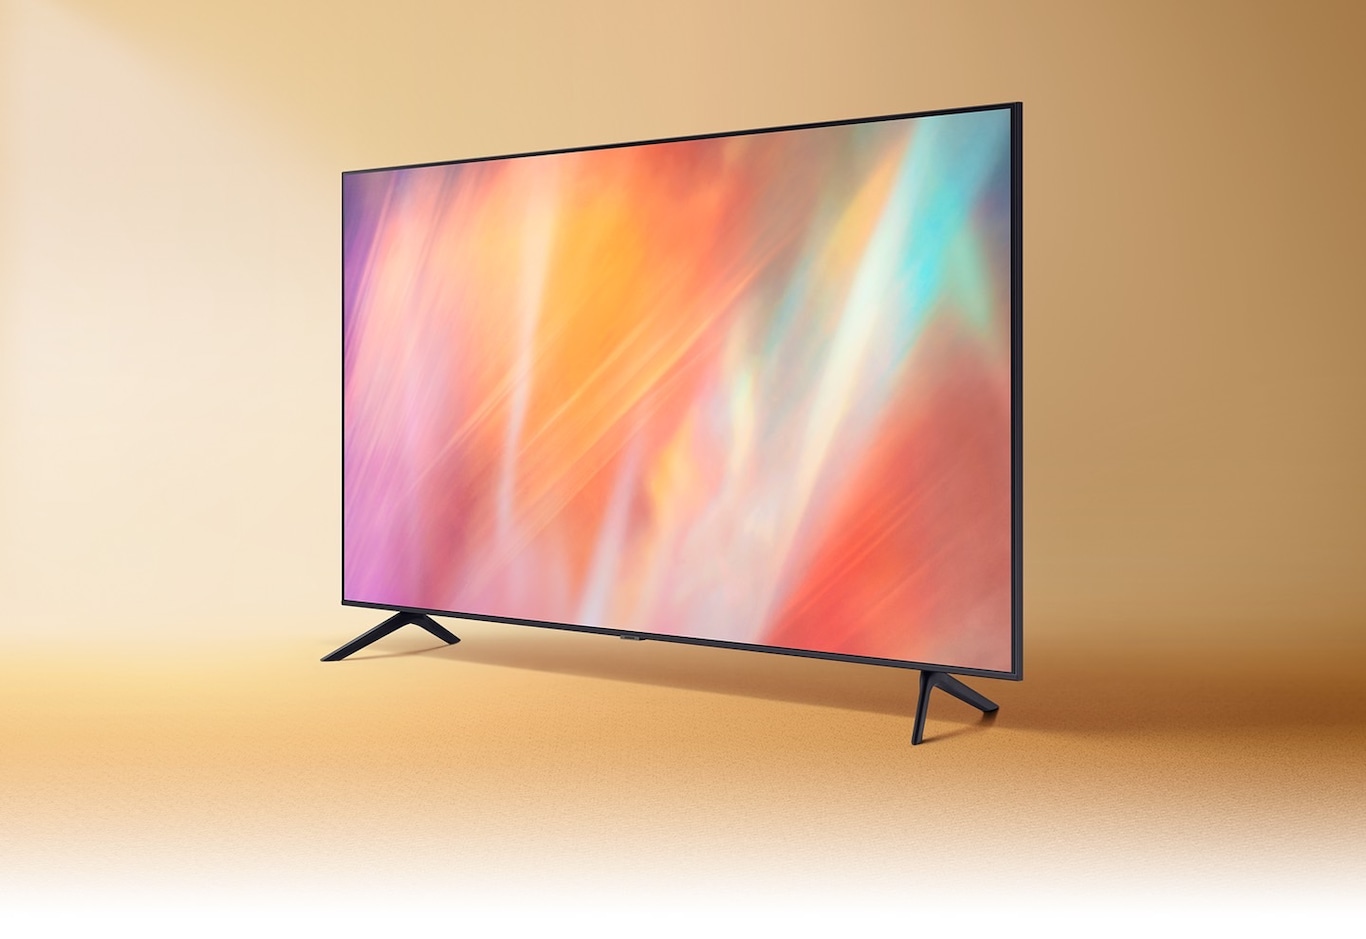 AU7000 displays intricately blended color graphics which demonstrate vivid crystal color.